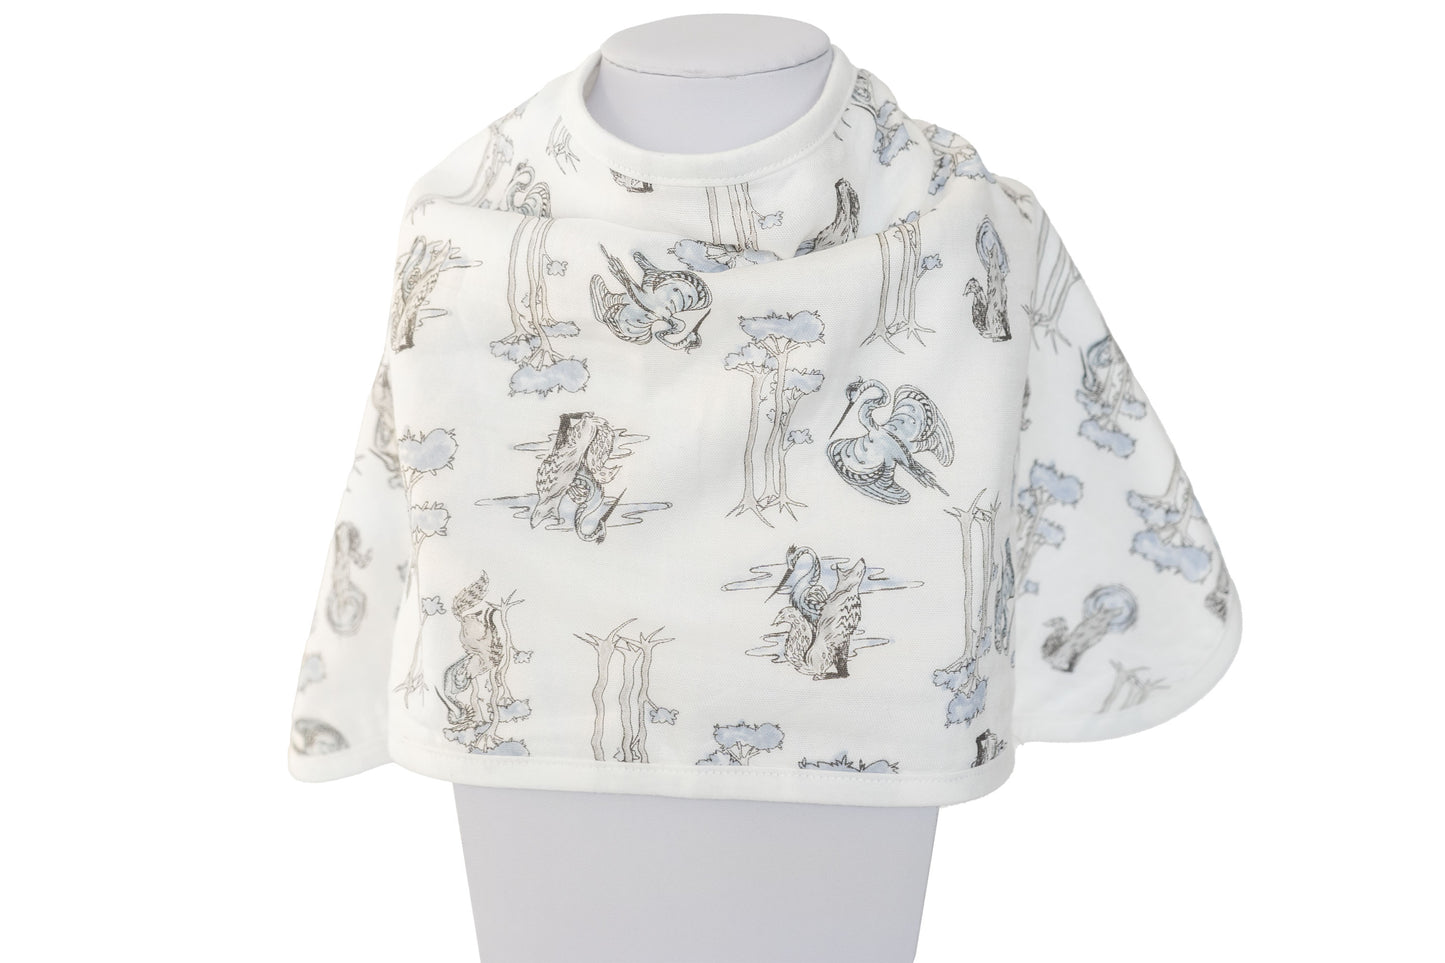 Burp 'n Bib (2 Pack) - The Wolf and The Ox